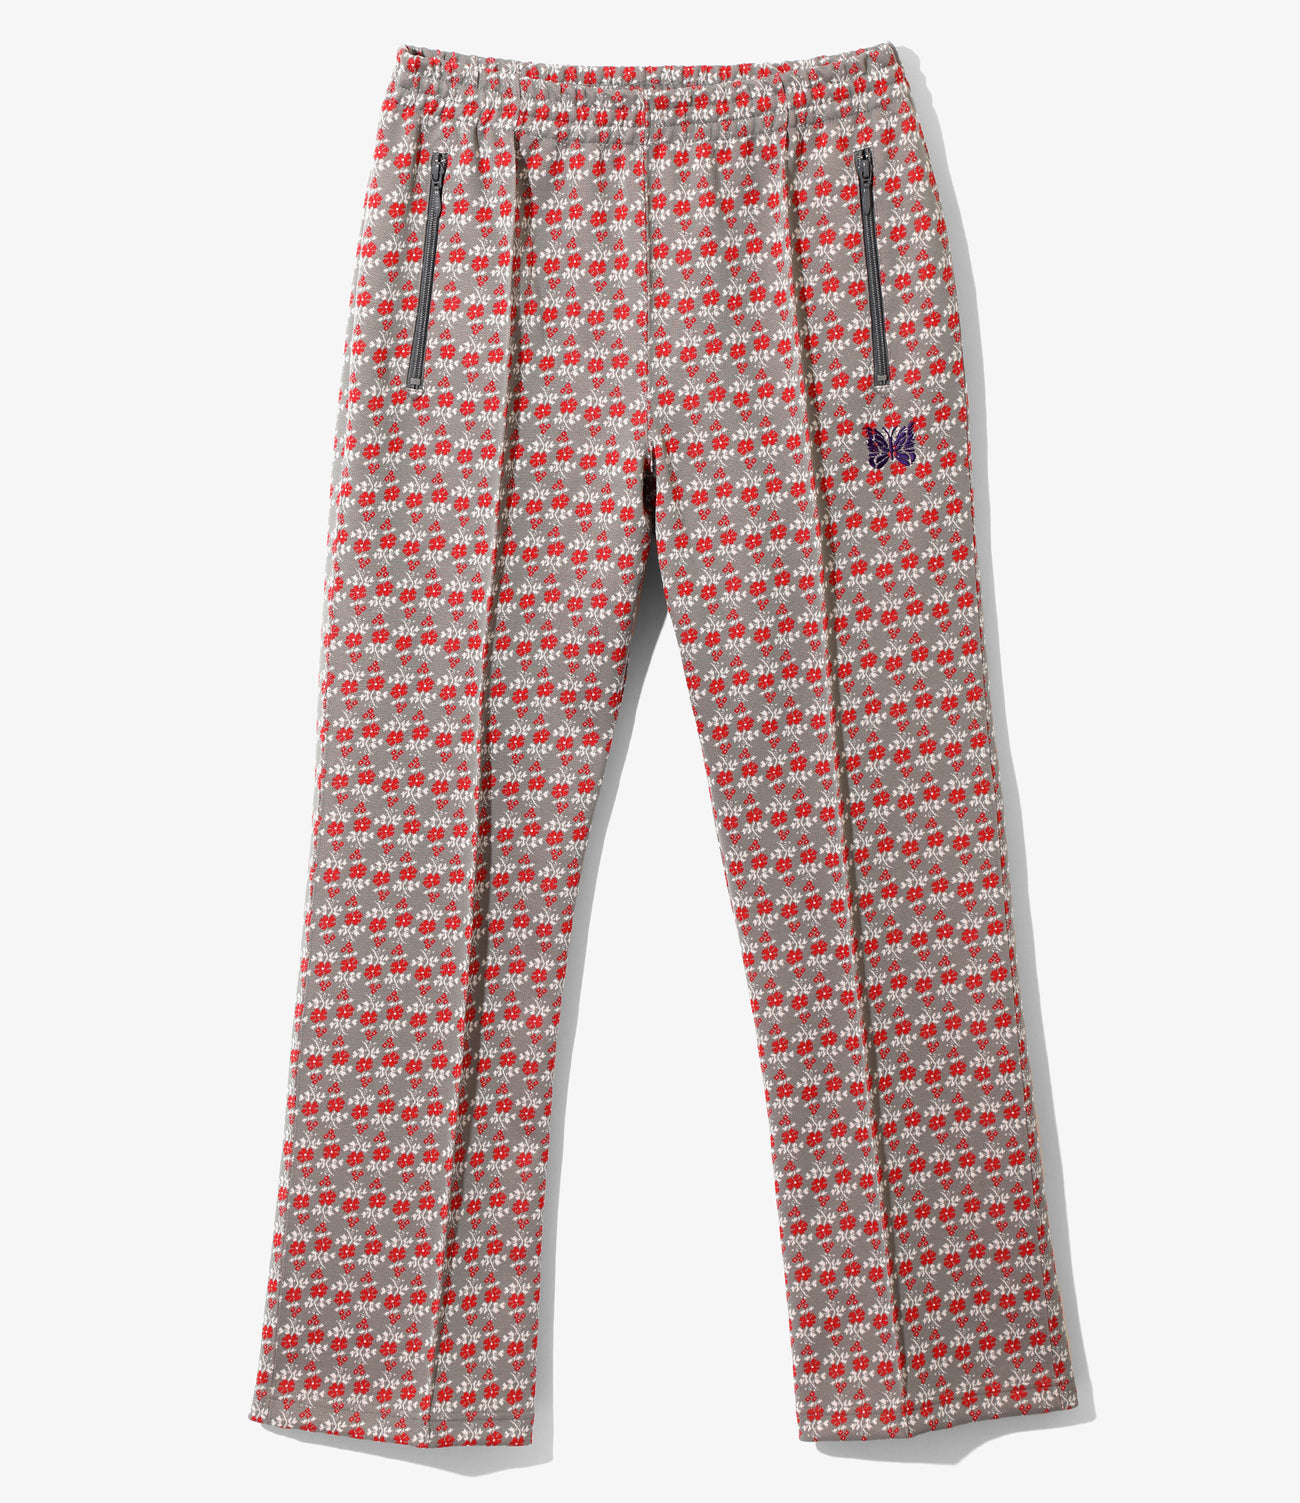 Needles Track Pant - Poly Jq. – unexpected store